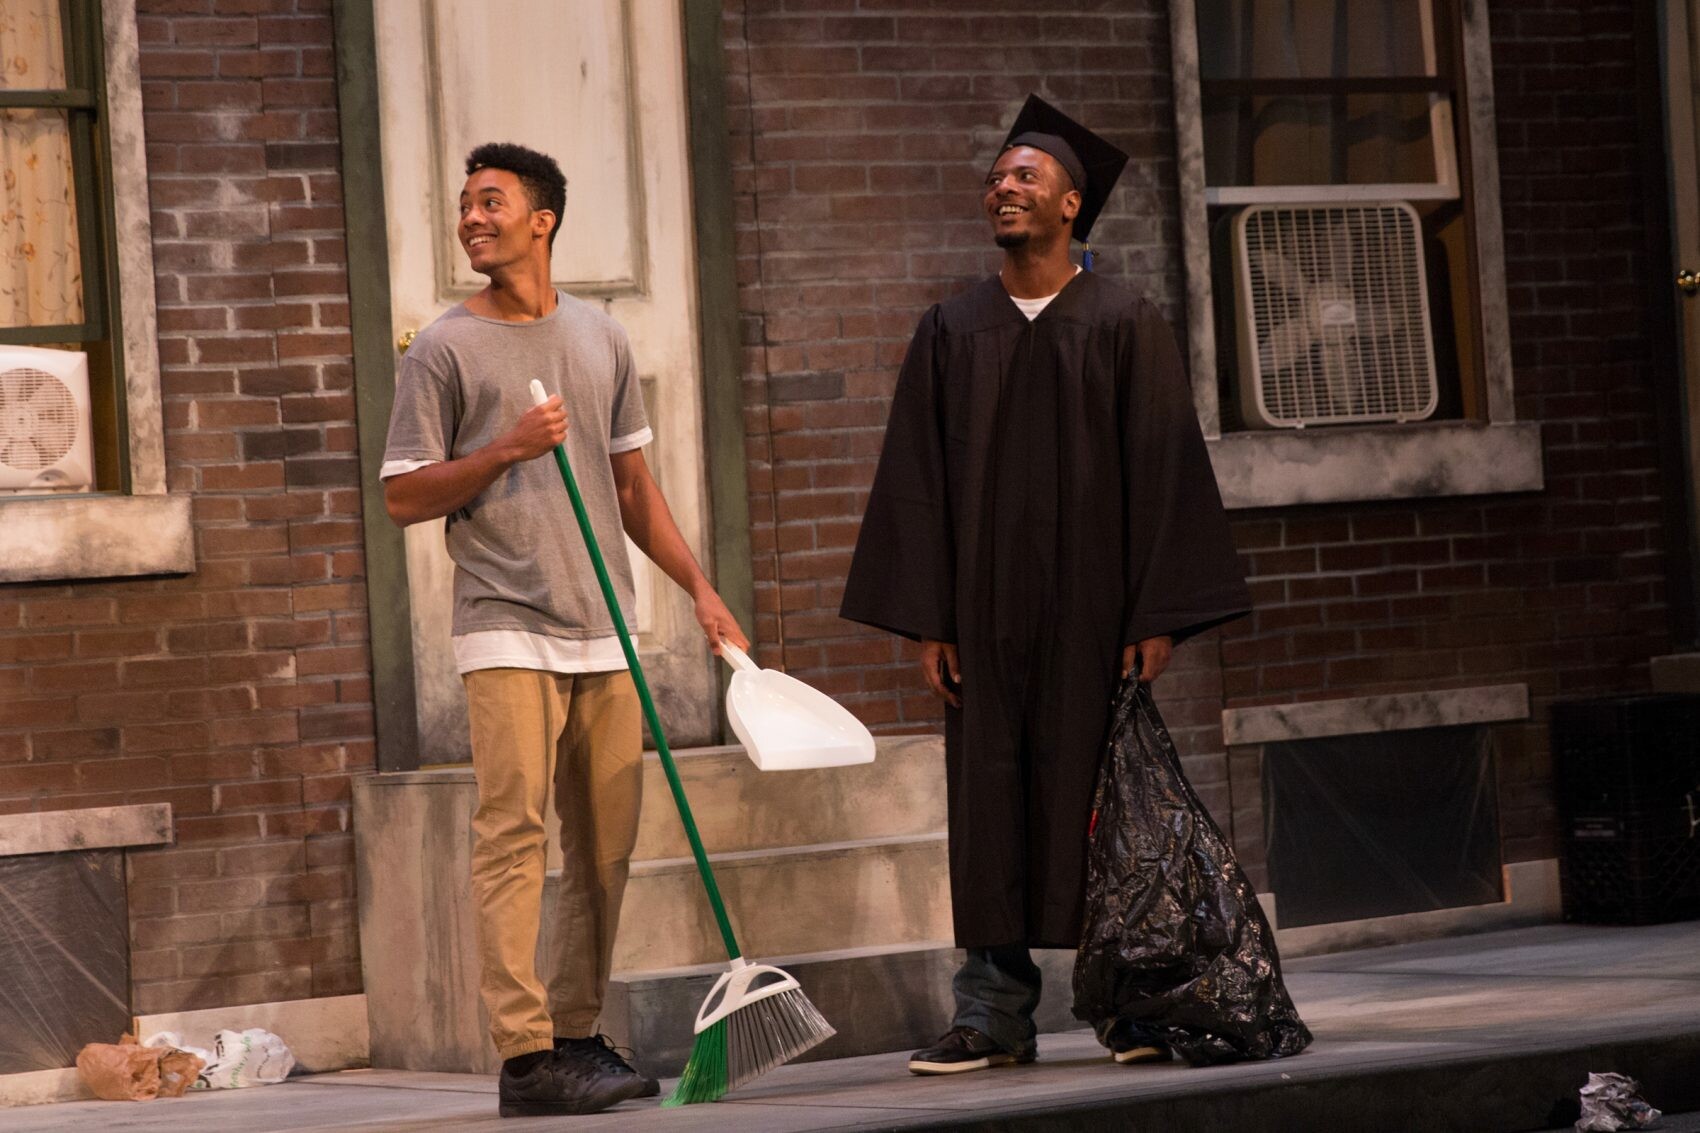 two actors on a porch, one holding a broom, and the other in a cap and gown holding a trash bag.